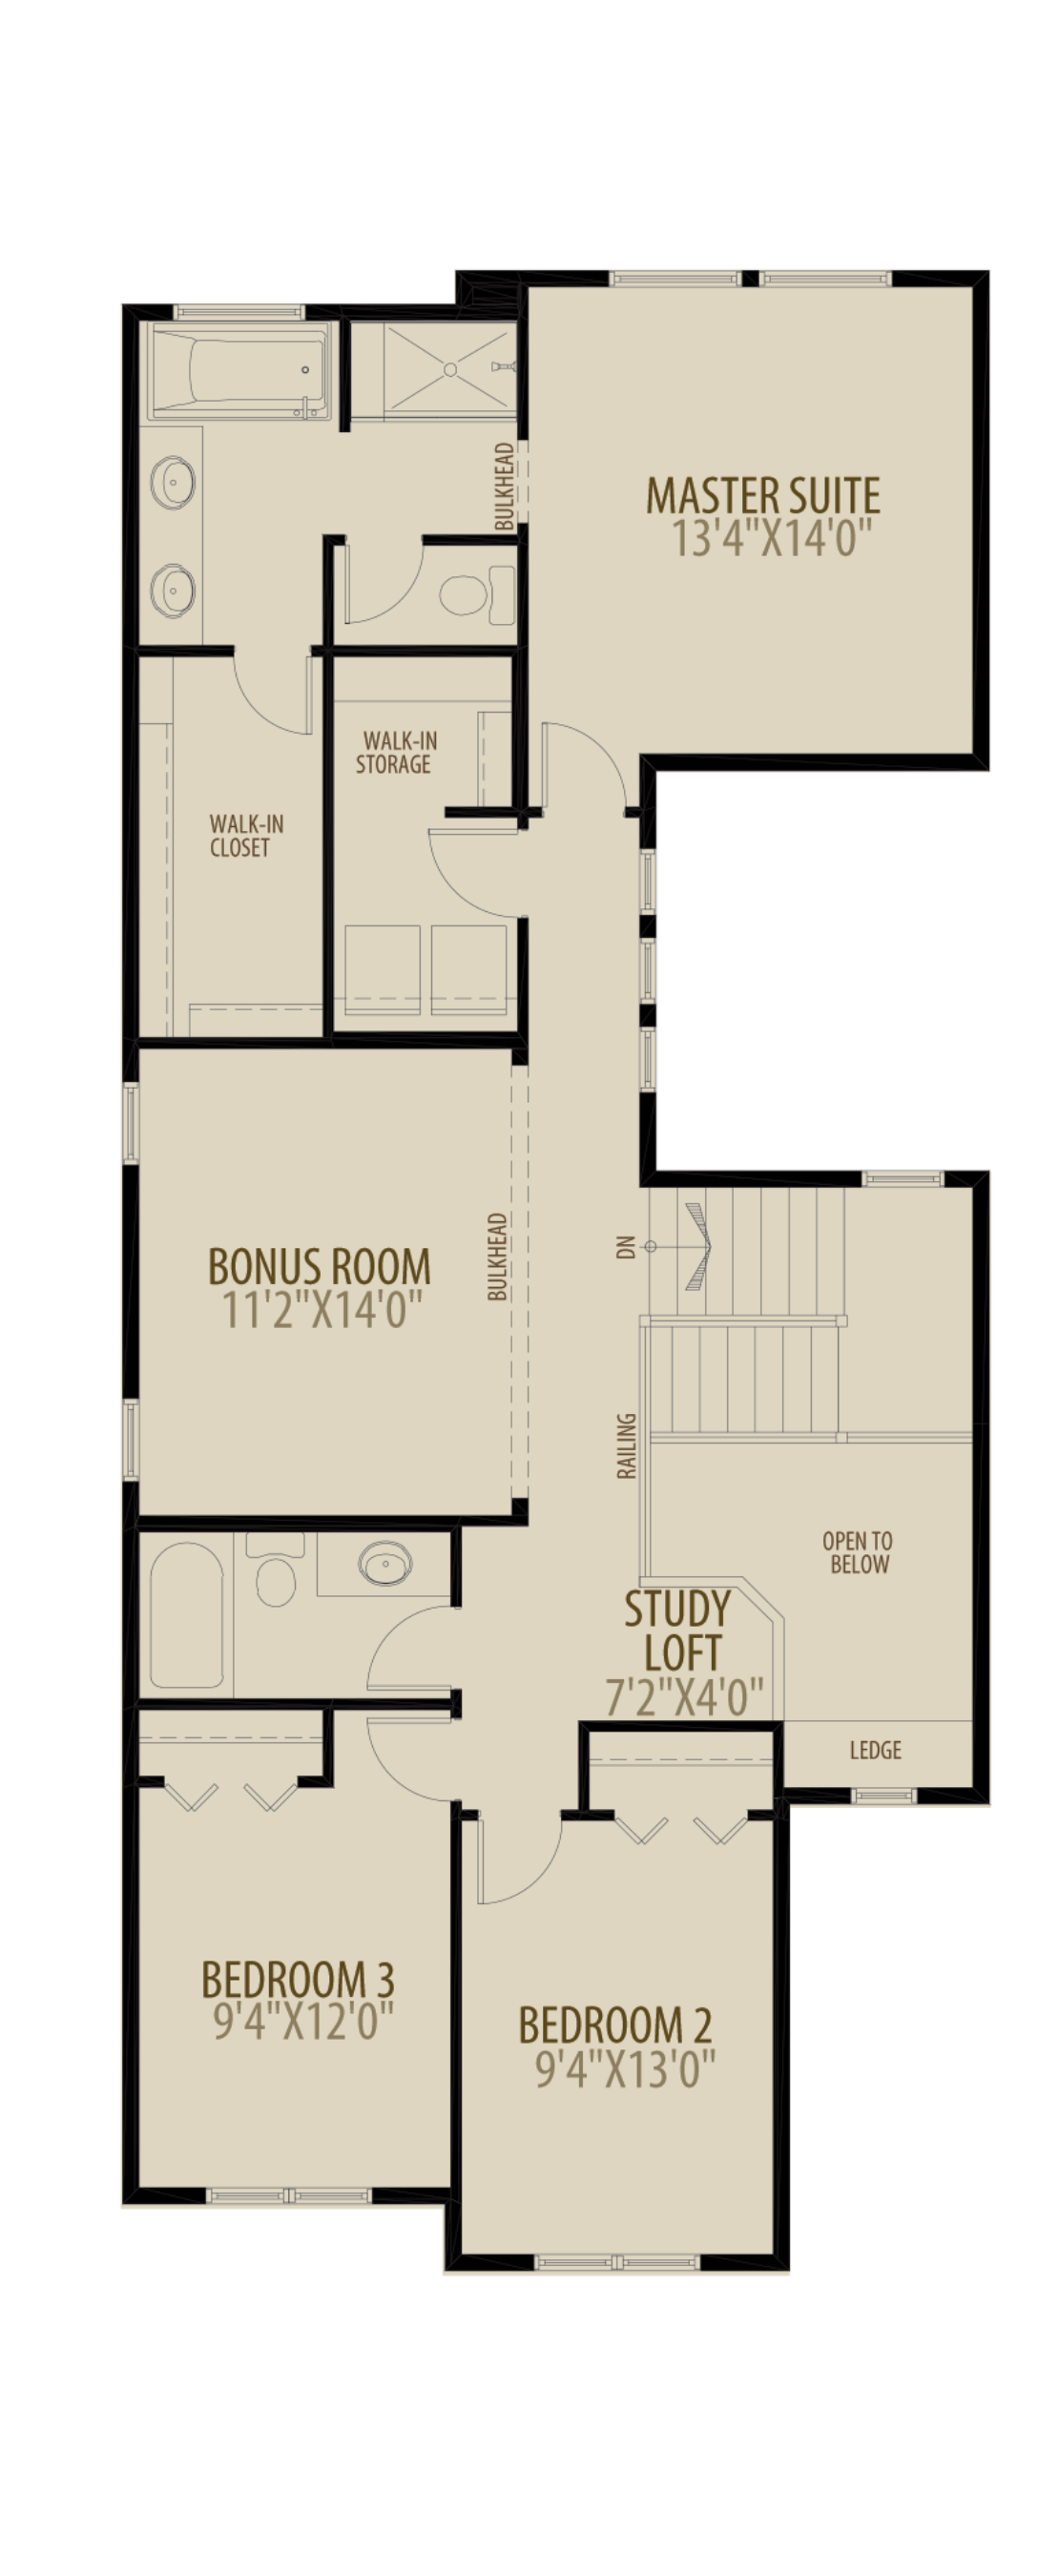 Extended Bedrooms adds 20 sq ft